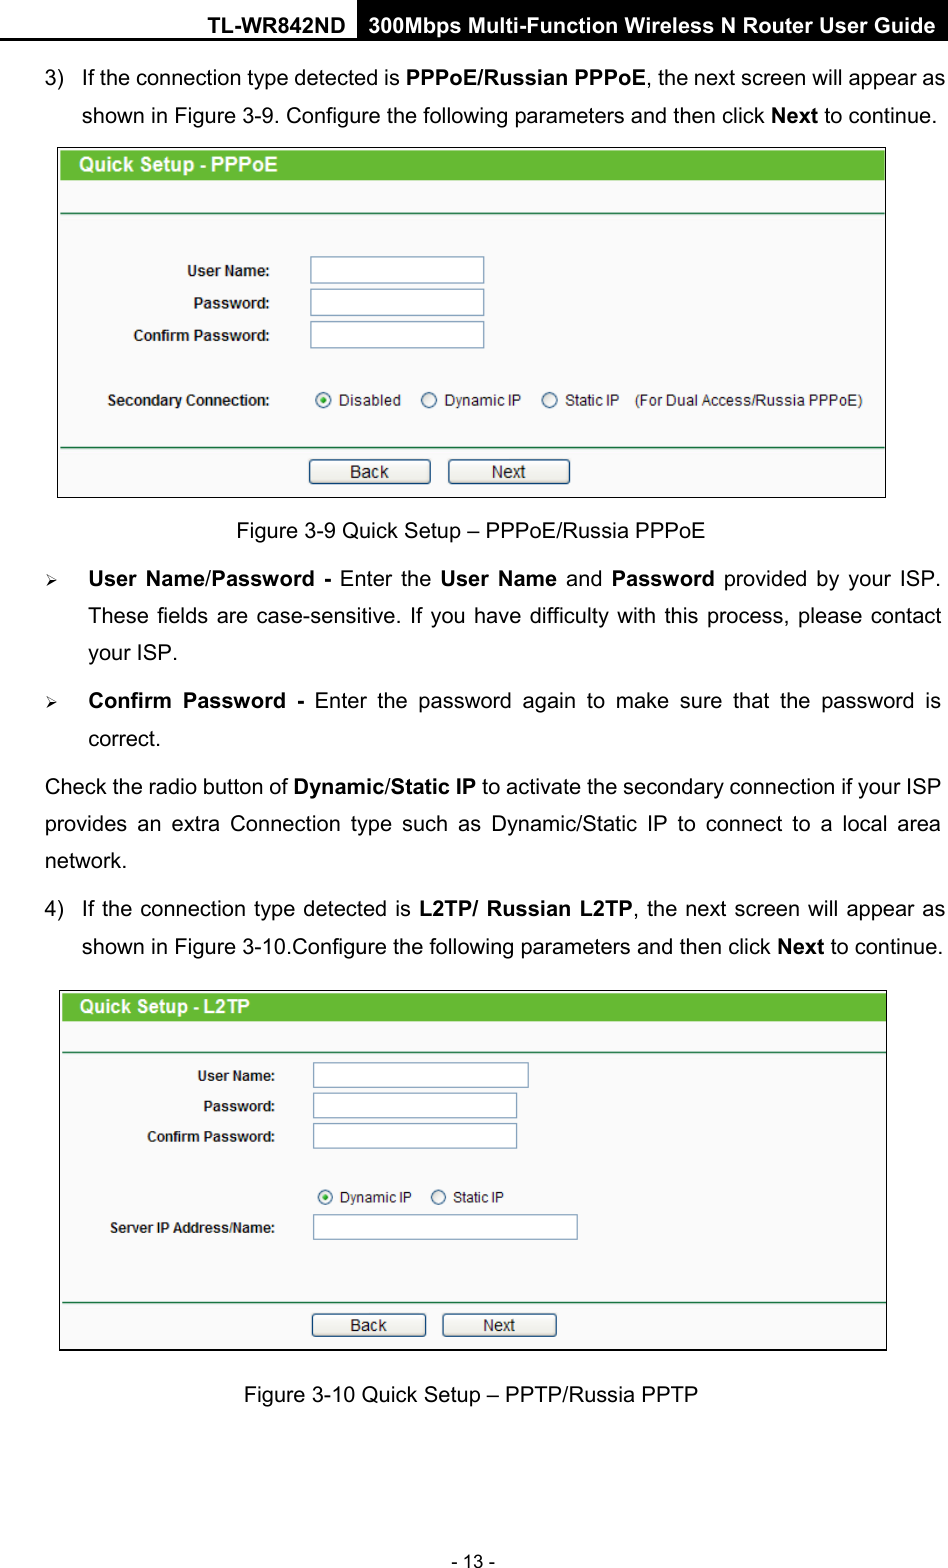 TL-WR842ND 300Mbps Multi-Function Wireless N Router User Guide  - 13 - 3) If the connection type detected is PPPoE/Russian PPPoE, the next screen will appear as shown in Figure 3-9. Configure the following parameters and then click Next to continue.  Figure 3-9 Quick Setup – PPPoE/Russia PPPoE  User Name/Password  -  Enter the User Name and  Password provided by your ISP. These fields are case-sensitive. If you have difficulty with this process, please contact your ISP.  Confirm Password  -  Enter the password again to make sure that the password is correct.   Check the radio button of Dynamic/Static IP to activate the secondary connection if your ISP provides an extra Connection type such as Dynamic/Static IP to connect to a local area network. 4)  If the connection type detected is L2TP/ Russian L2TP, the next screen will appear as shown in Figure 3-10.Configure the following parameters and then click Next to continue.  Figure 3-10 Quick Setup – PPTP/Russia PPTP 